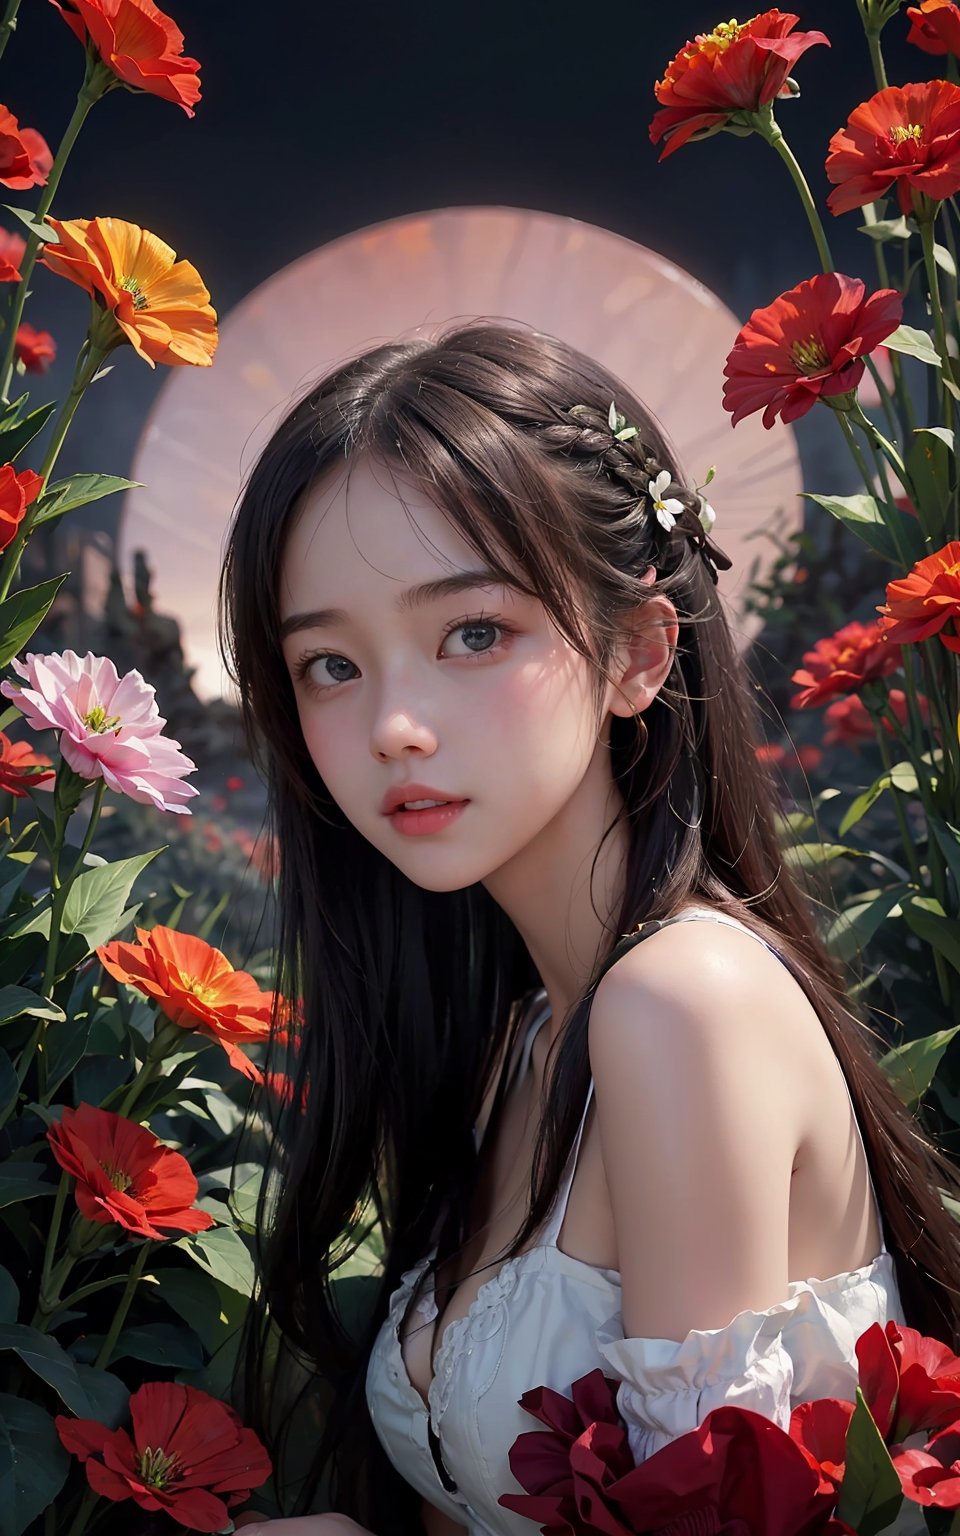  1girl, long hair, flower, Lisianthus, in the style of red and light azure, dreamy and romantic compositions, red, ethereal foliage, playful arrangements, fantasy, high contrast, ink strokes, explosions, over exposure, purple and red tone impression, abstract, whole body capture,
, (\meng ze\), Light master